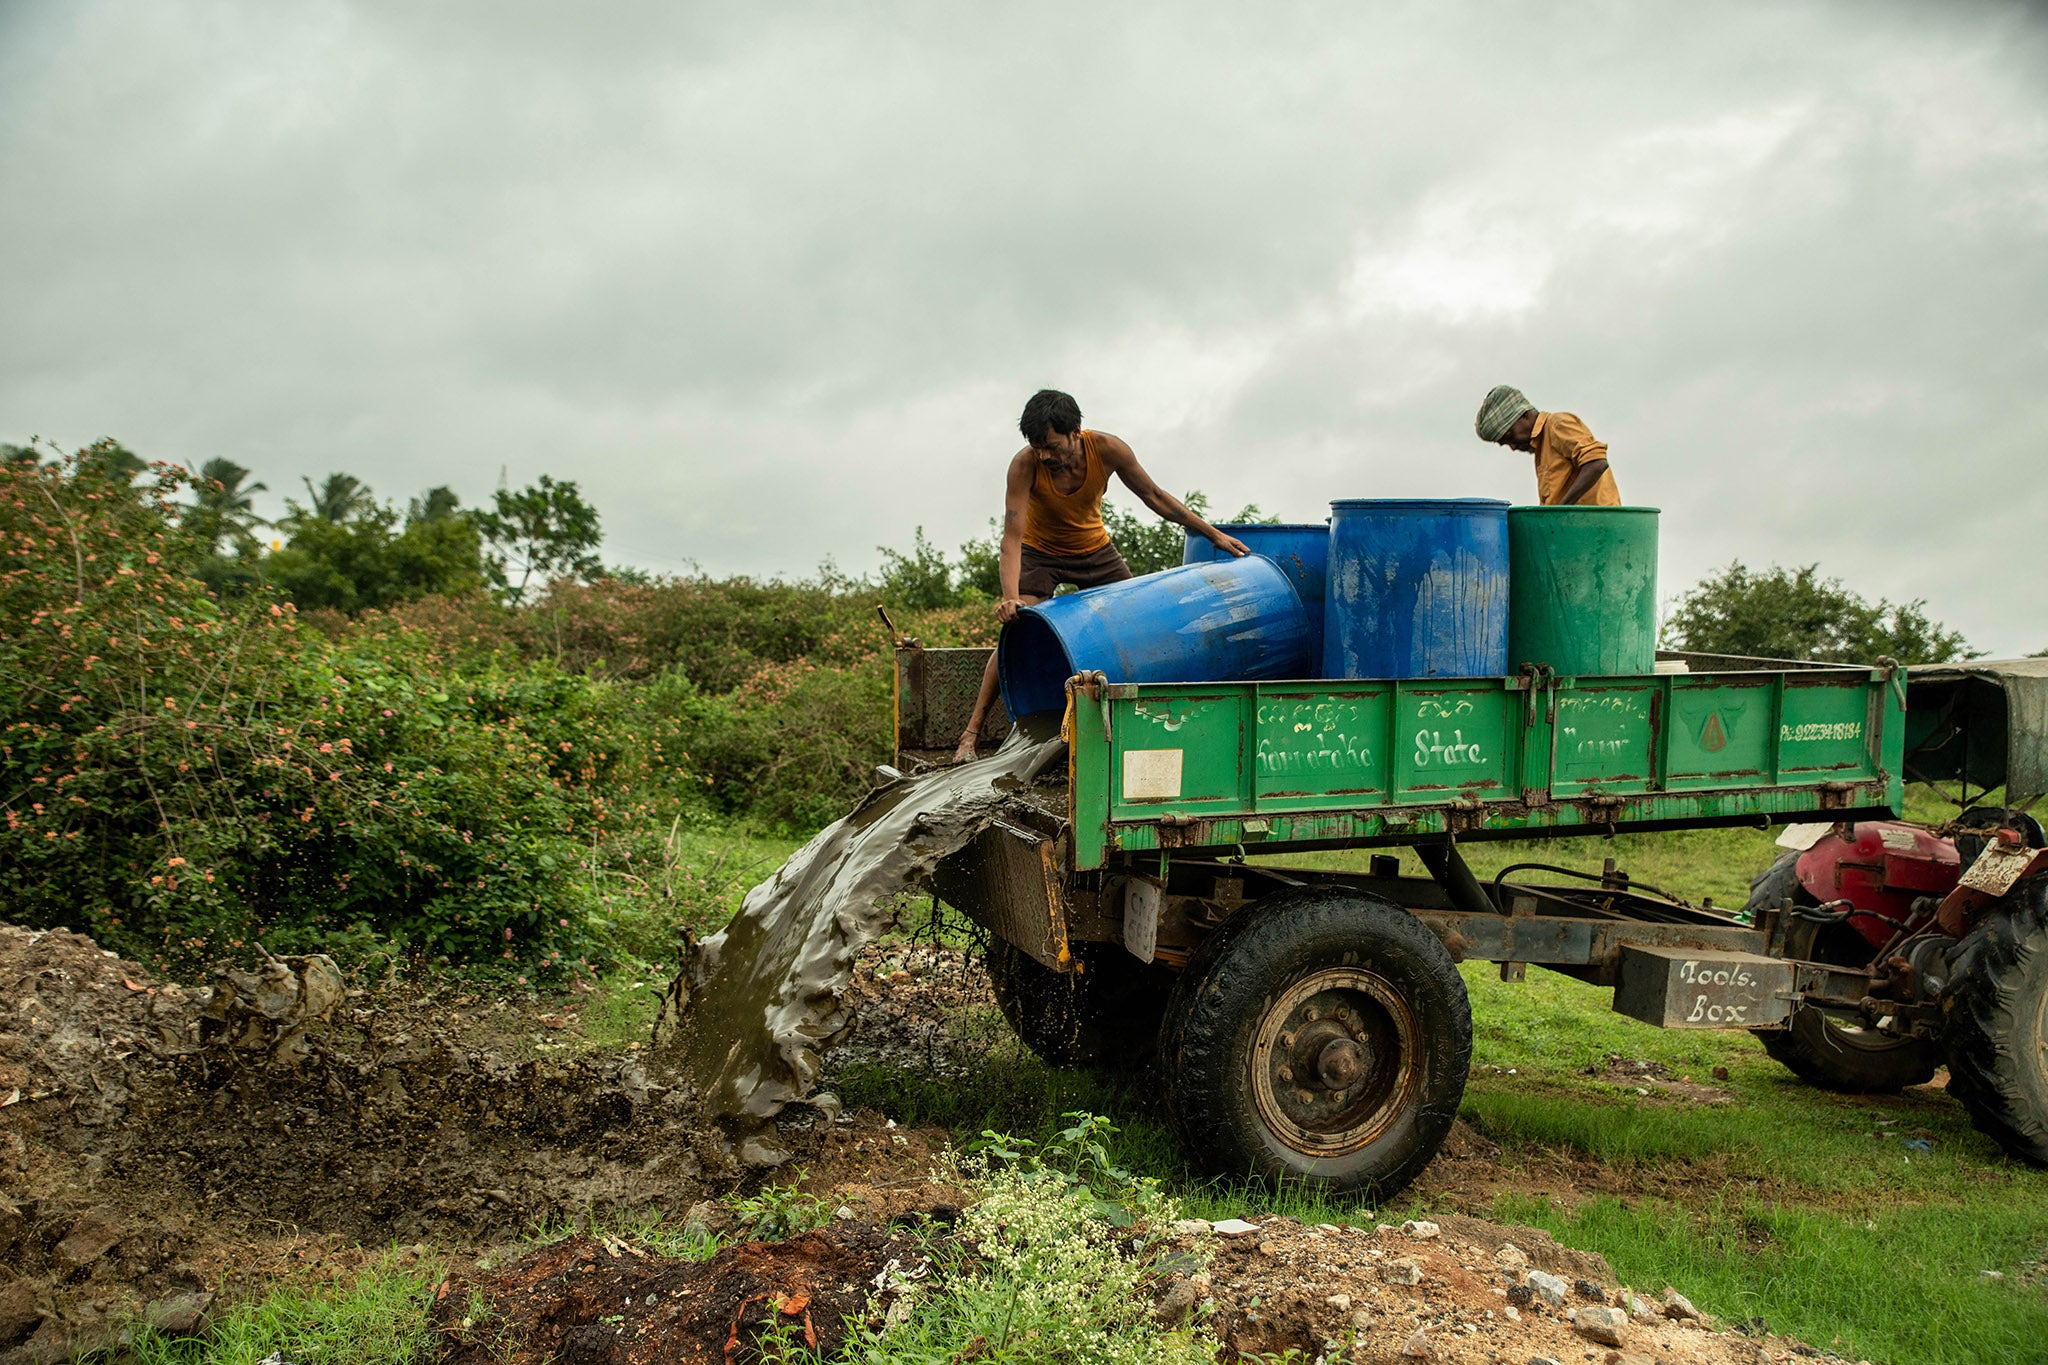 After emptying the pits, workers dispose of the sewage in a nearly field